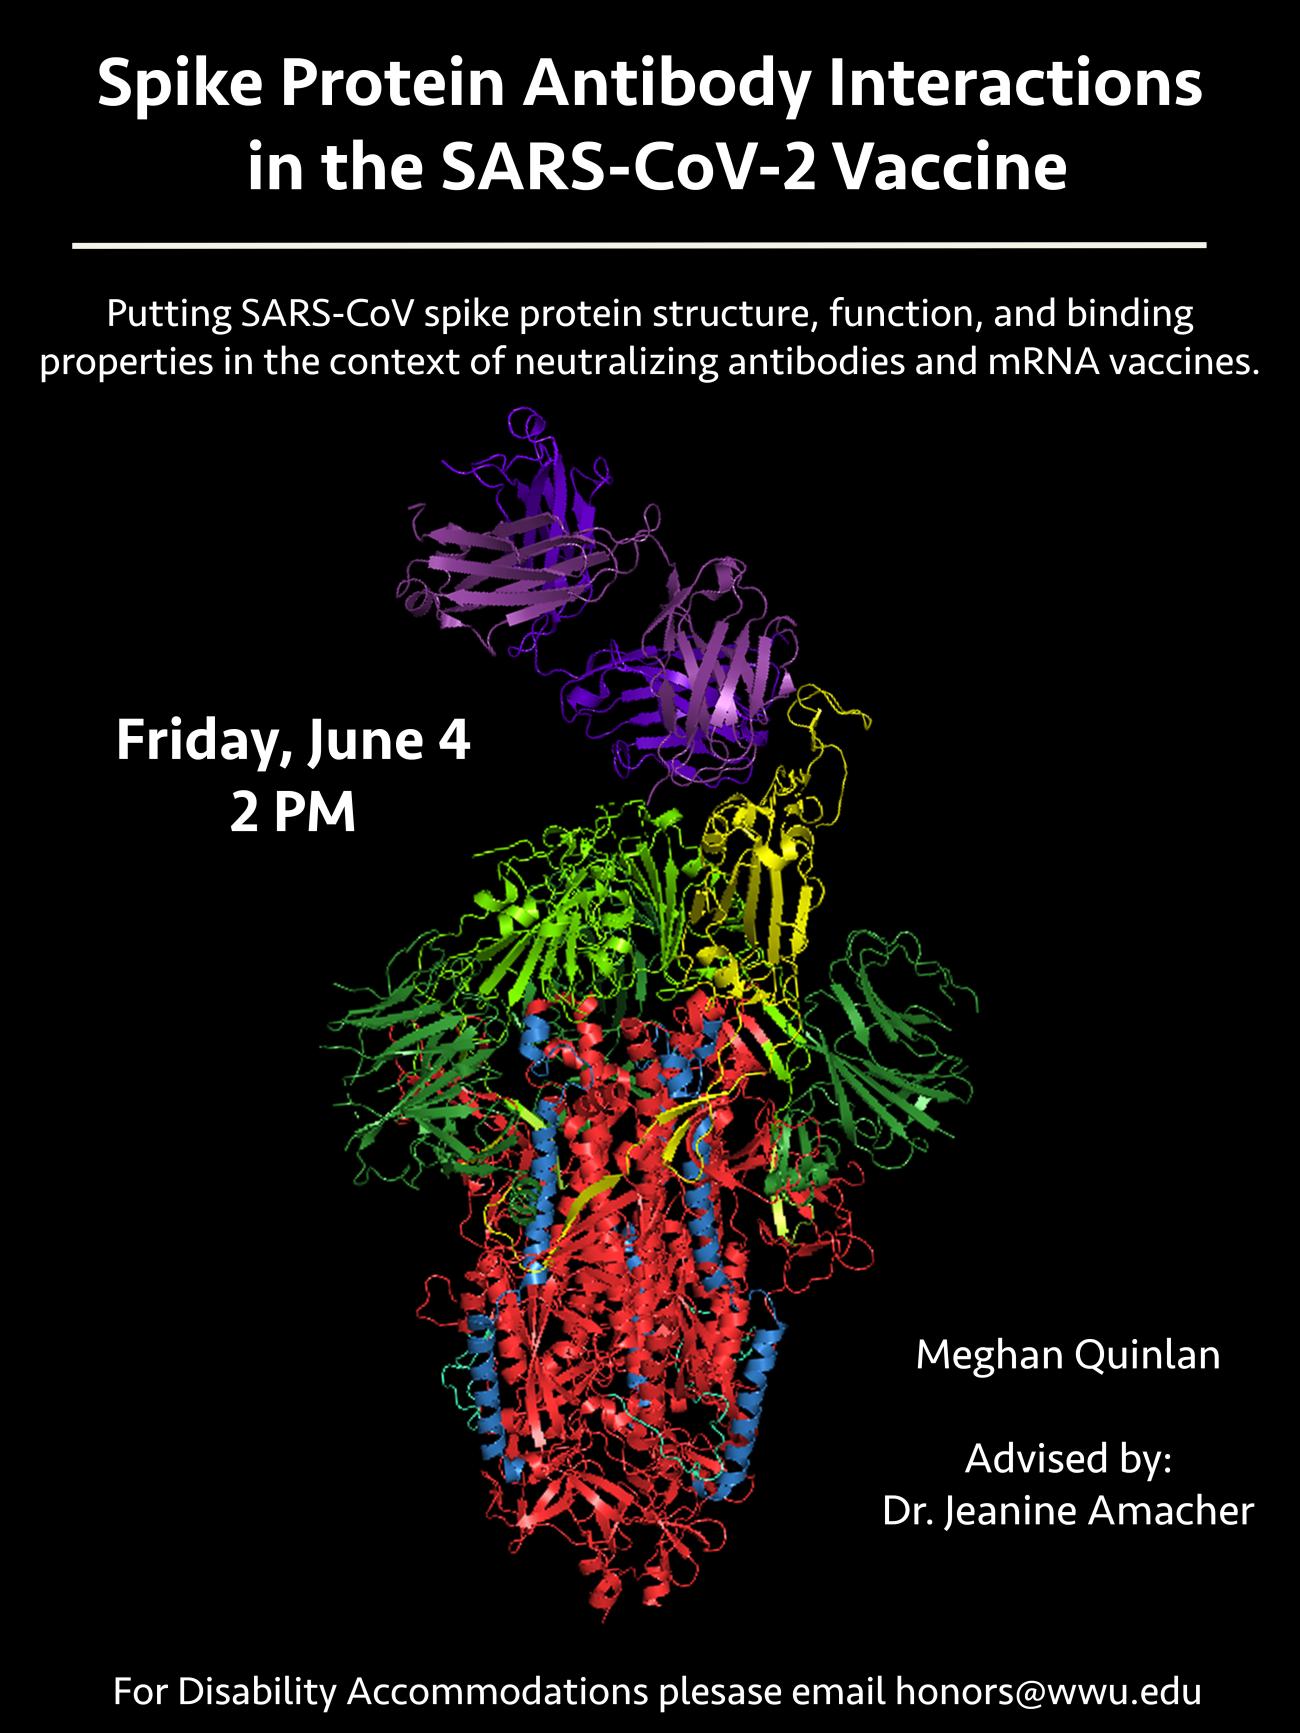 ​Black poster with a multi-colored cartoon of SARS-CoV-2 spike protein shown interacting with the heavy and light chains of an antibody. Text reads: "Spike Protein Antibody Interactions in the SARS-CoV-2 Vaccine. Putting SARS-CoV spike protein structure, fuction, and binding properties in the context of neutralizing antibodies and mRNA vaccines. Friday, June 4, 2 PM. Meghan Quinlan. Advised by Dr. Jeanine Amacher. For disability accommodations please email honors@wwu.edu". 